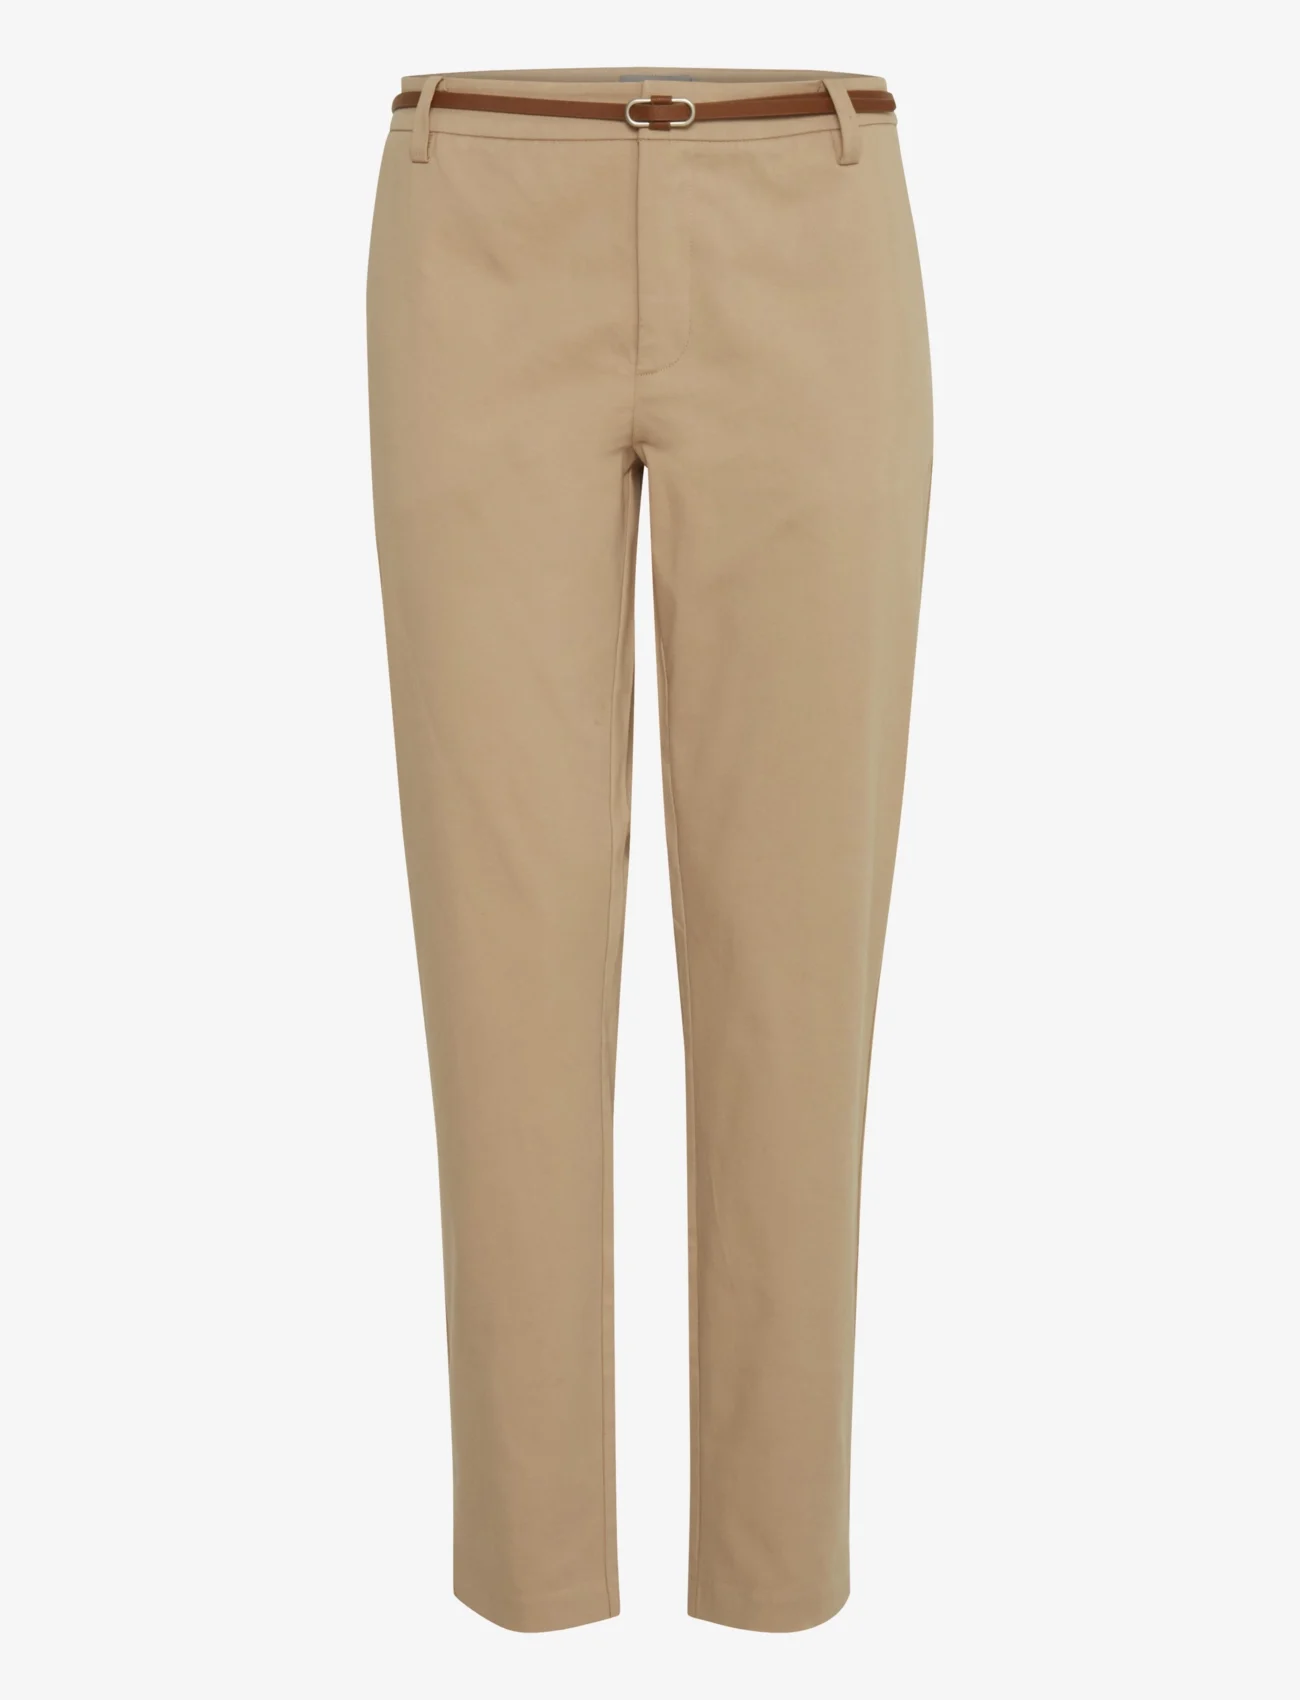 b.young - BYDAYS CIGARET PANTS 2 - - juhlamuotia outlet-hintaan - nomad - 0